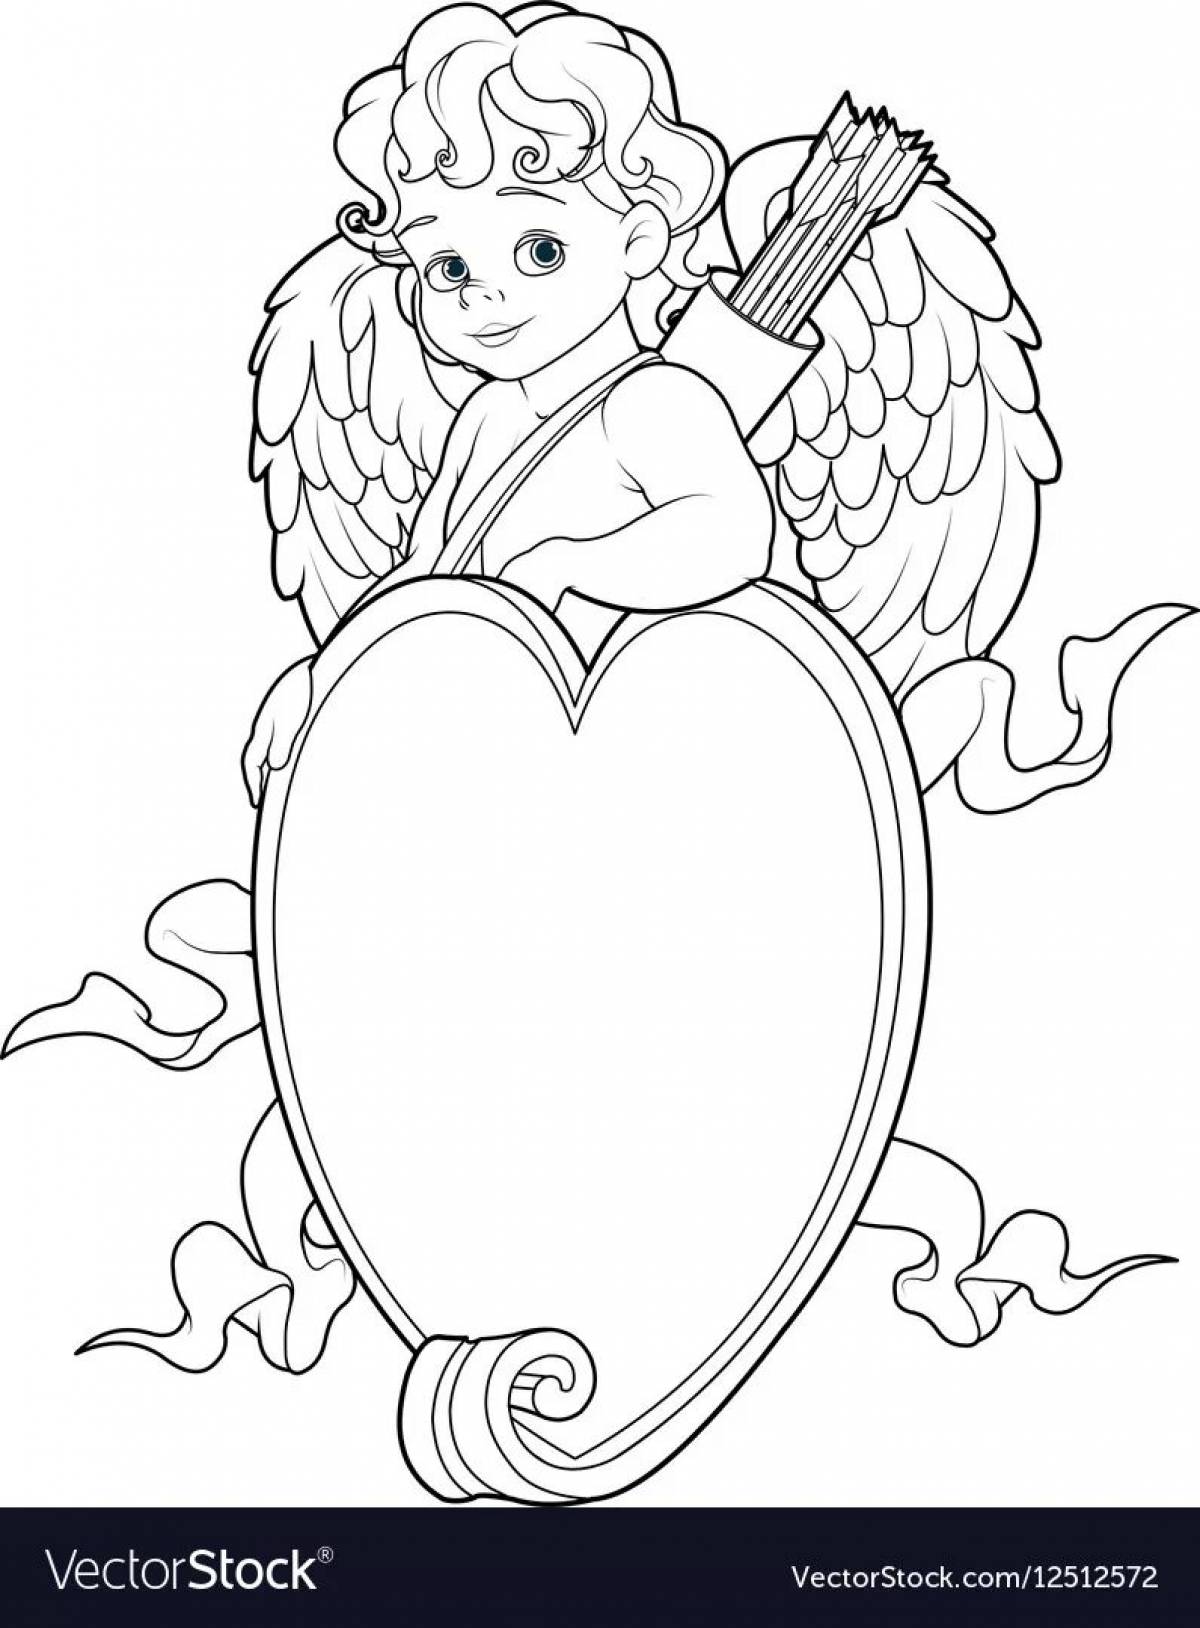 Coloring book peaceful cupid with heart